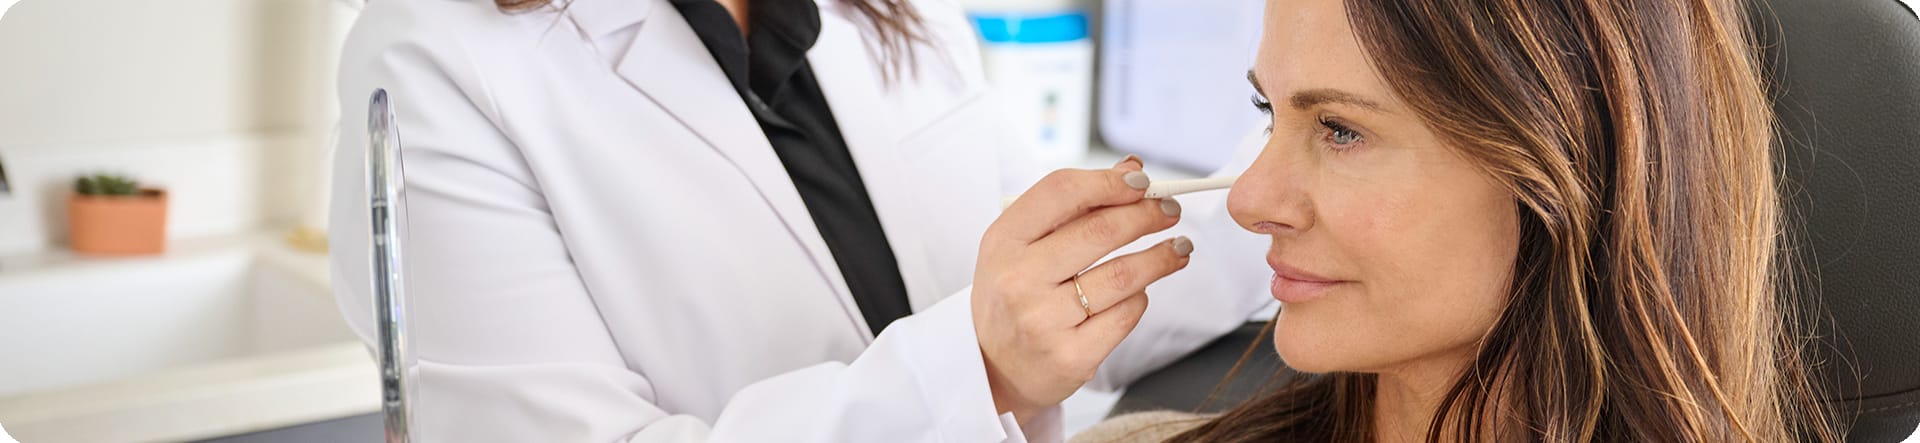 Image: Close-up photograph of a woman undergoing a consultation for injectable treatment. A healthcare professional, holding a pointer, gestures towards specific areas on the client's face while discussing the treatment plan. The focus is on the interaction between the client and the professional, highlighting the informative and personalized nature of the consultation process.